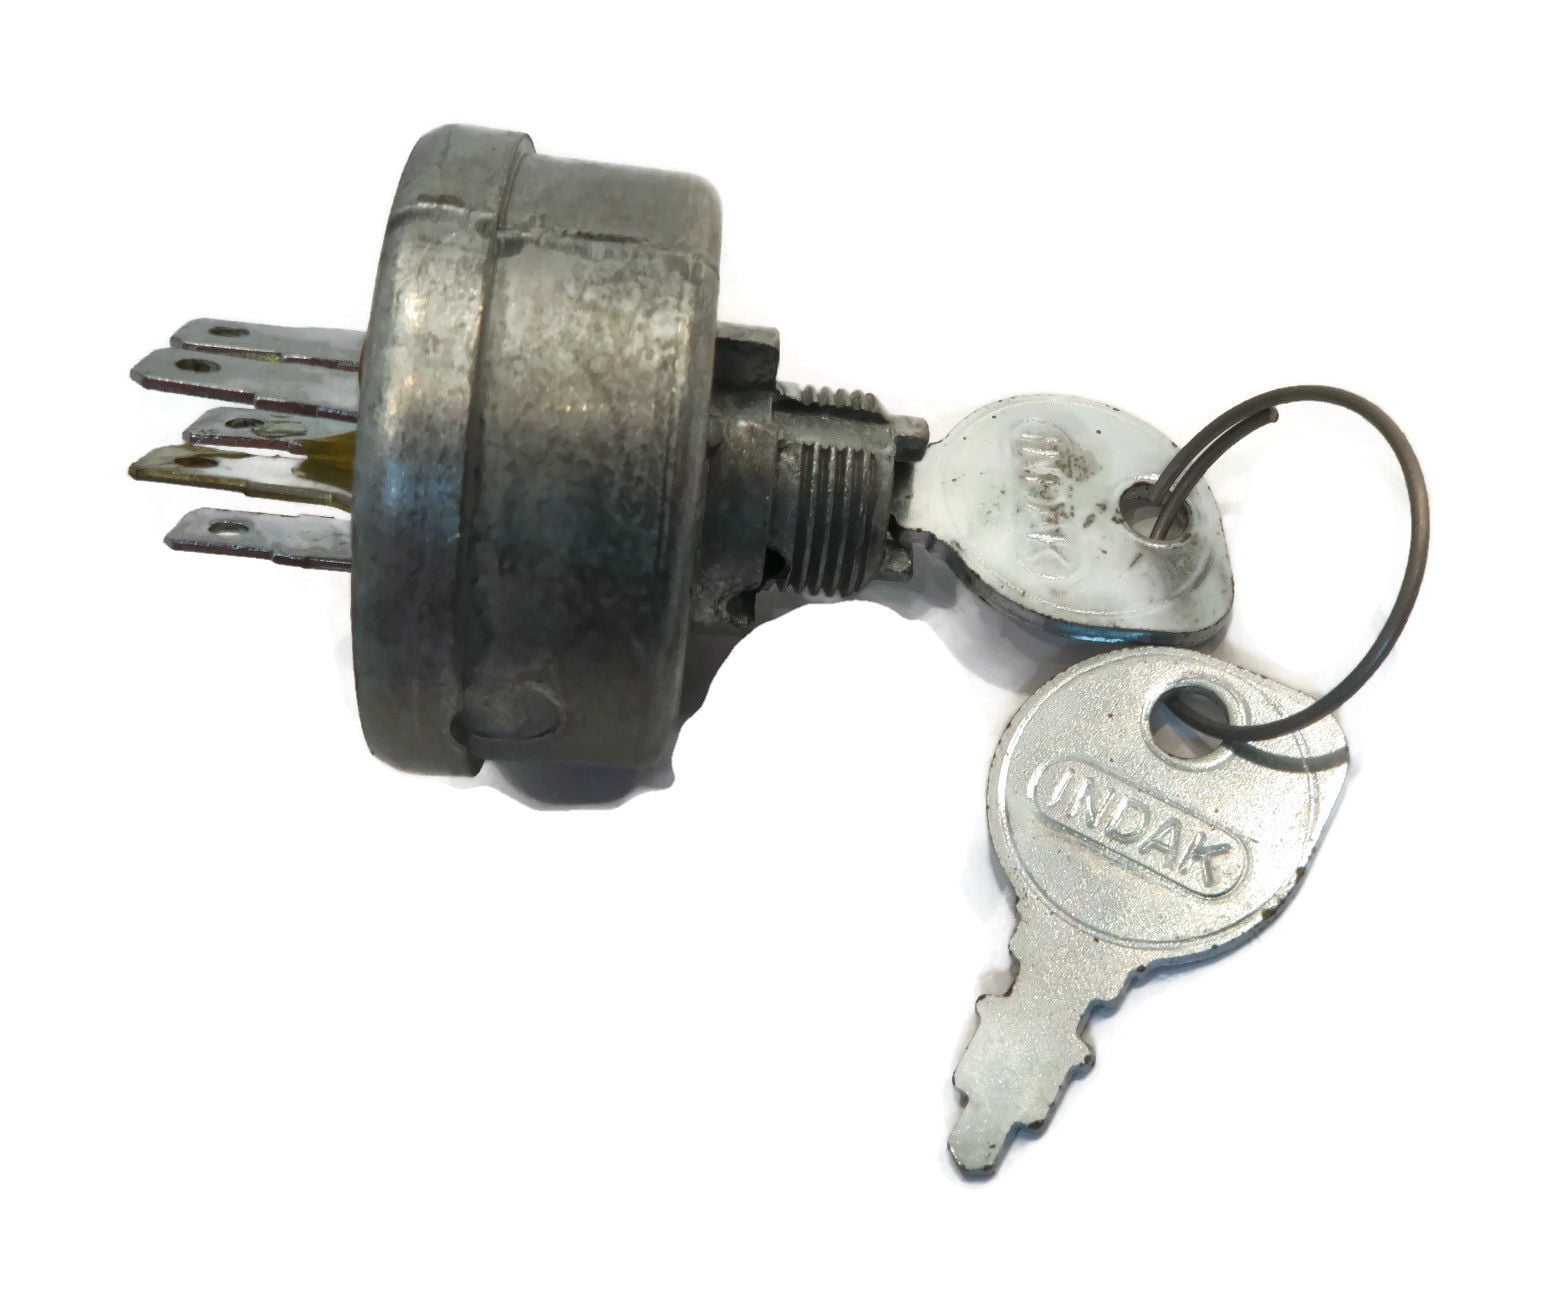 Indak Replacement Ignition Switch For Ariens GT10-GT18